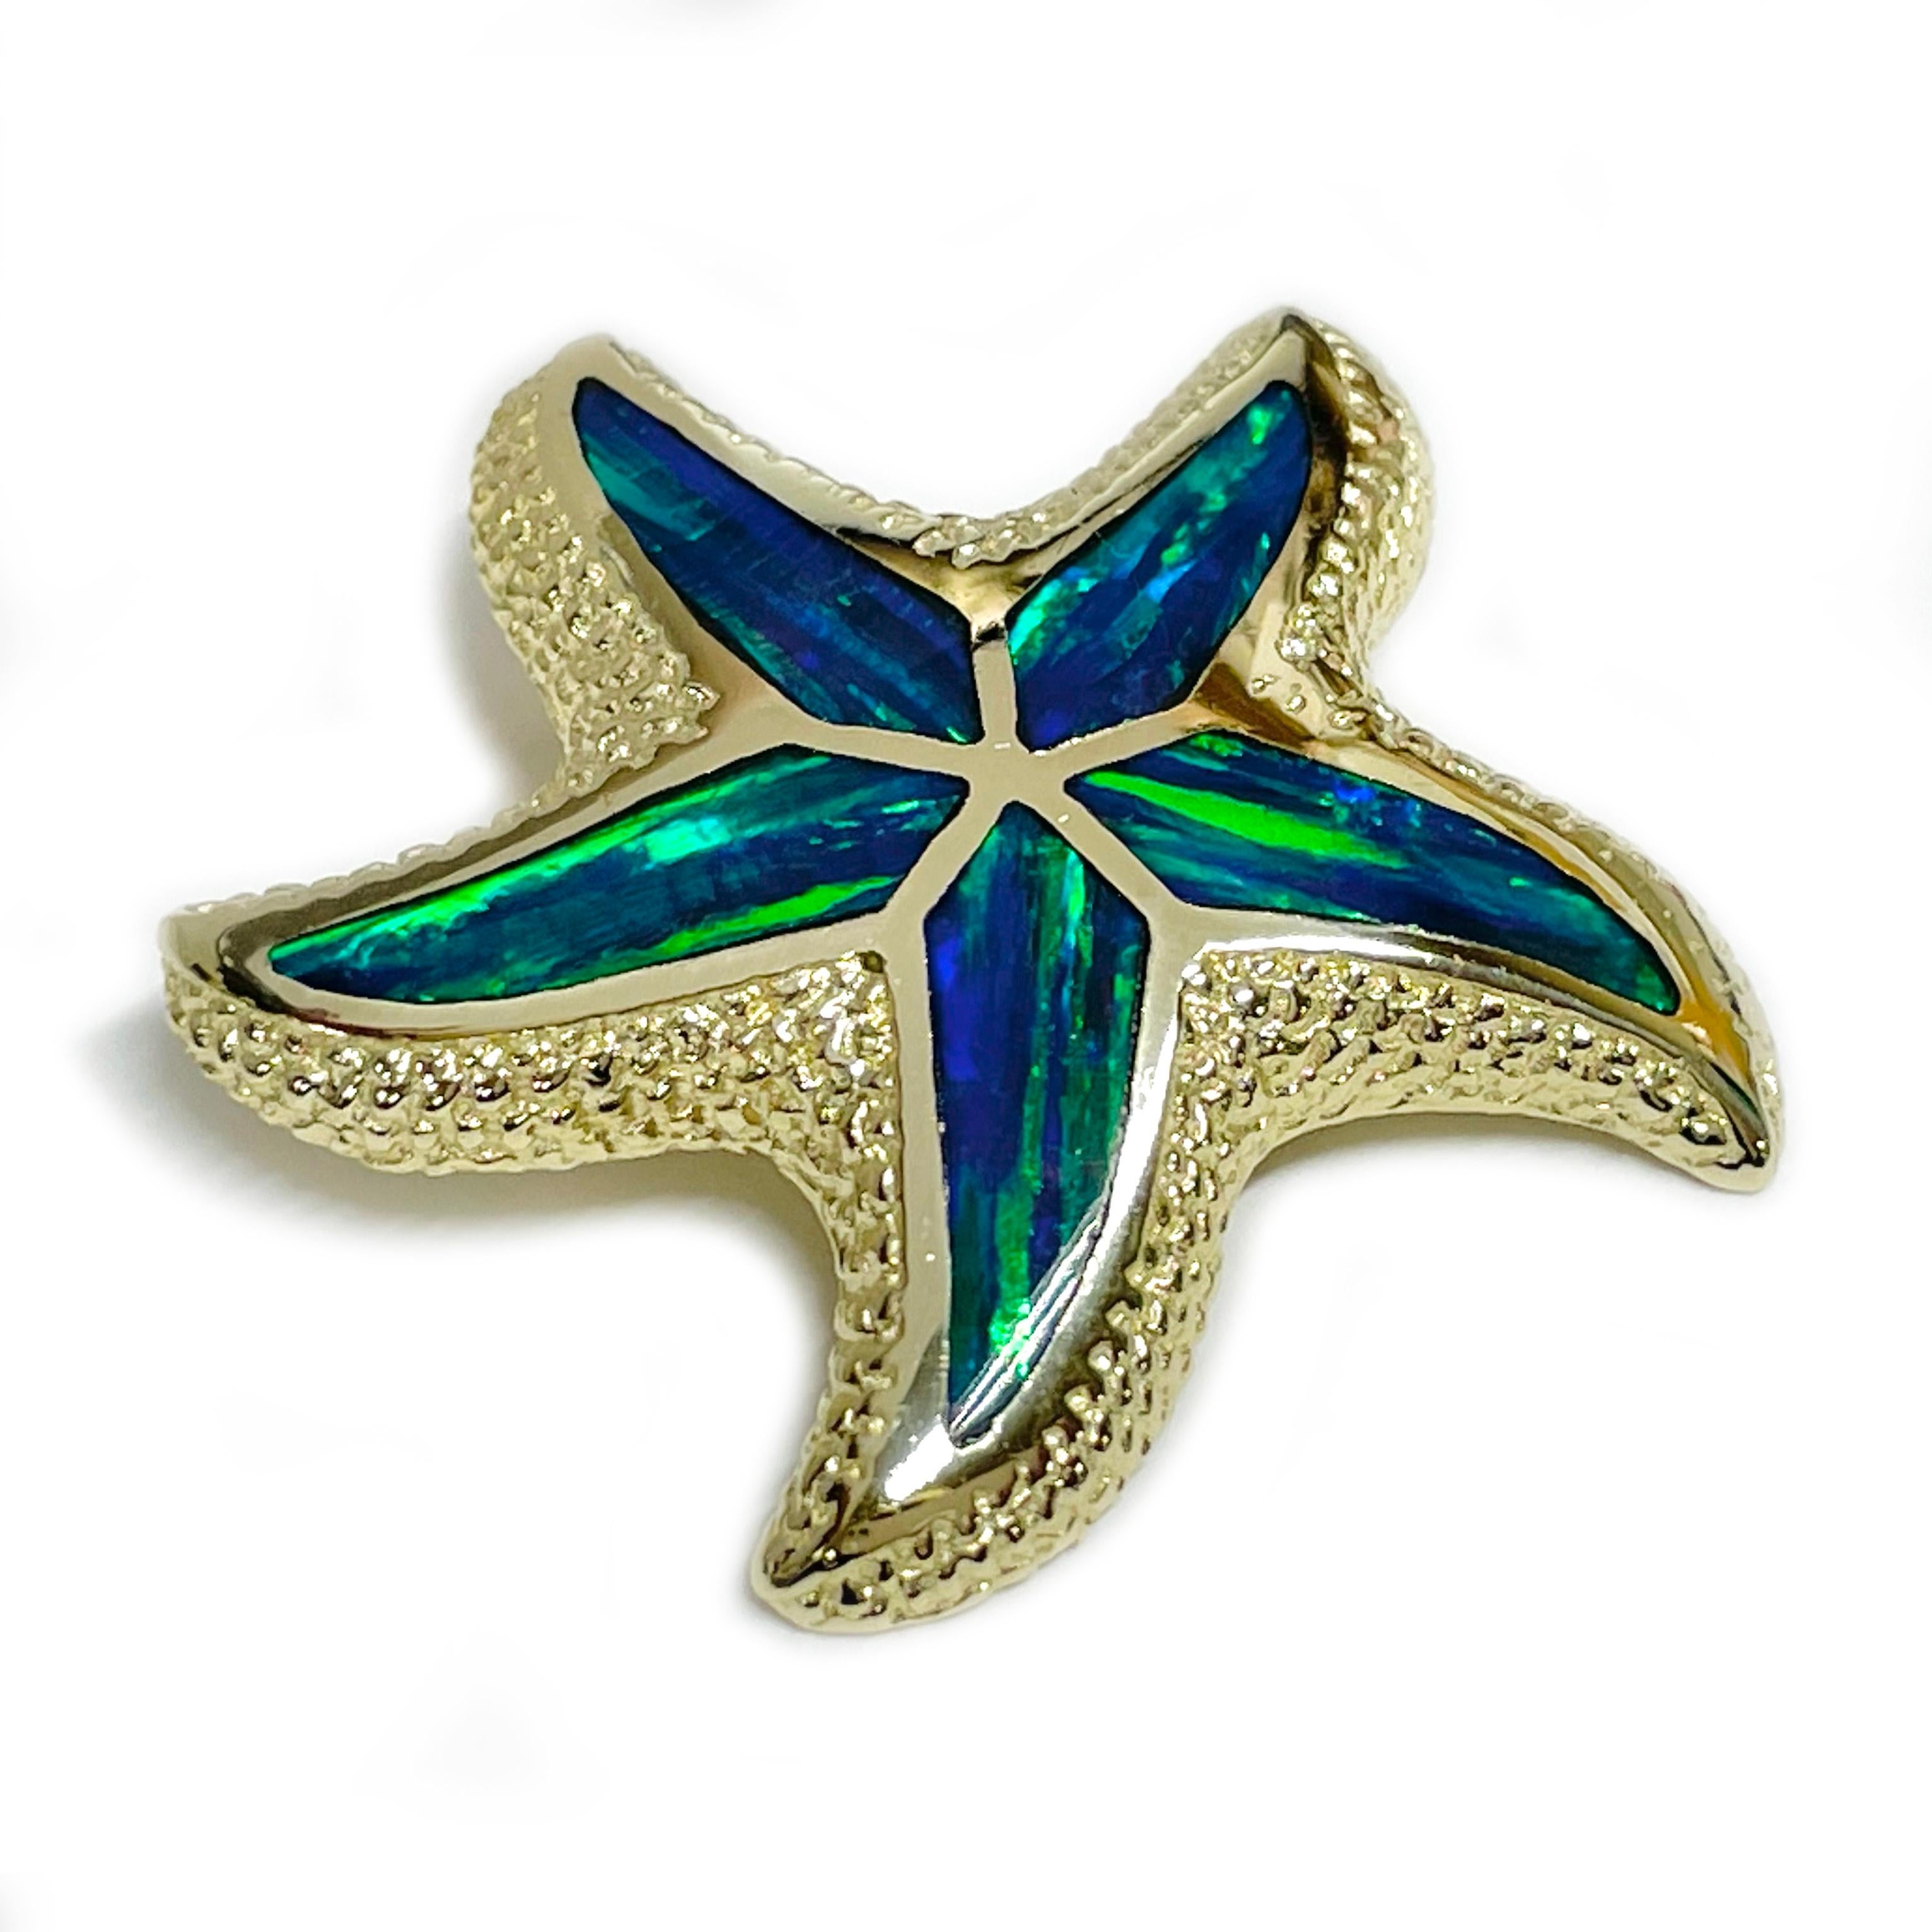 Yellow Gold Black Opal Starfish Pendant. The pendant has a textured finished along the edges and a smooth finish closer to the center where there are five black opal inlays that follow the shape of the star points. The opals have vibrant hues of